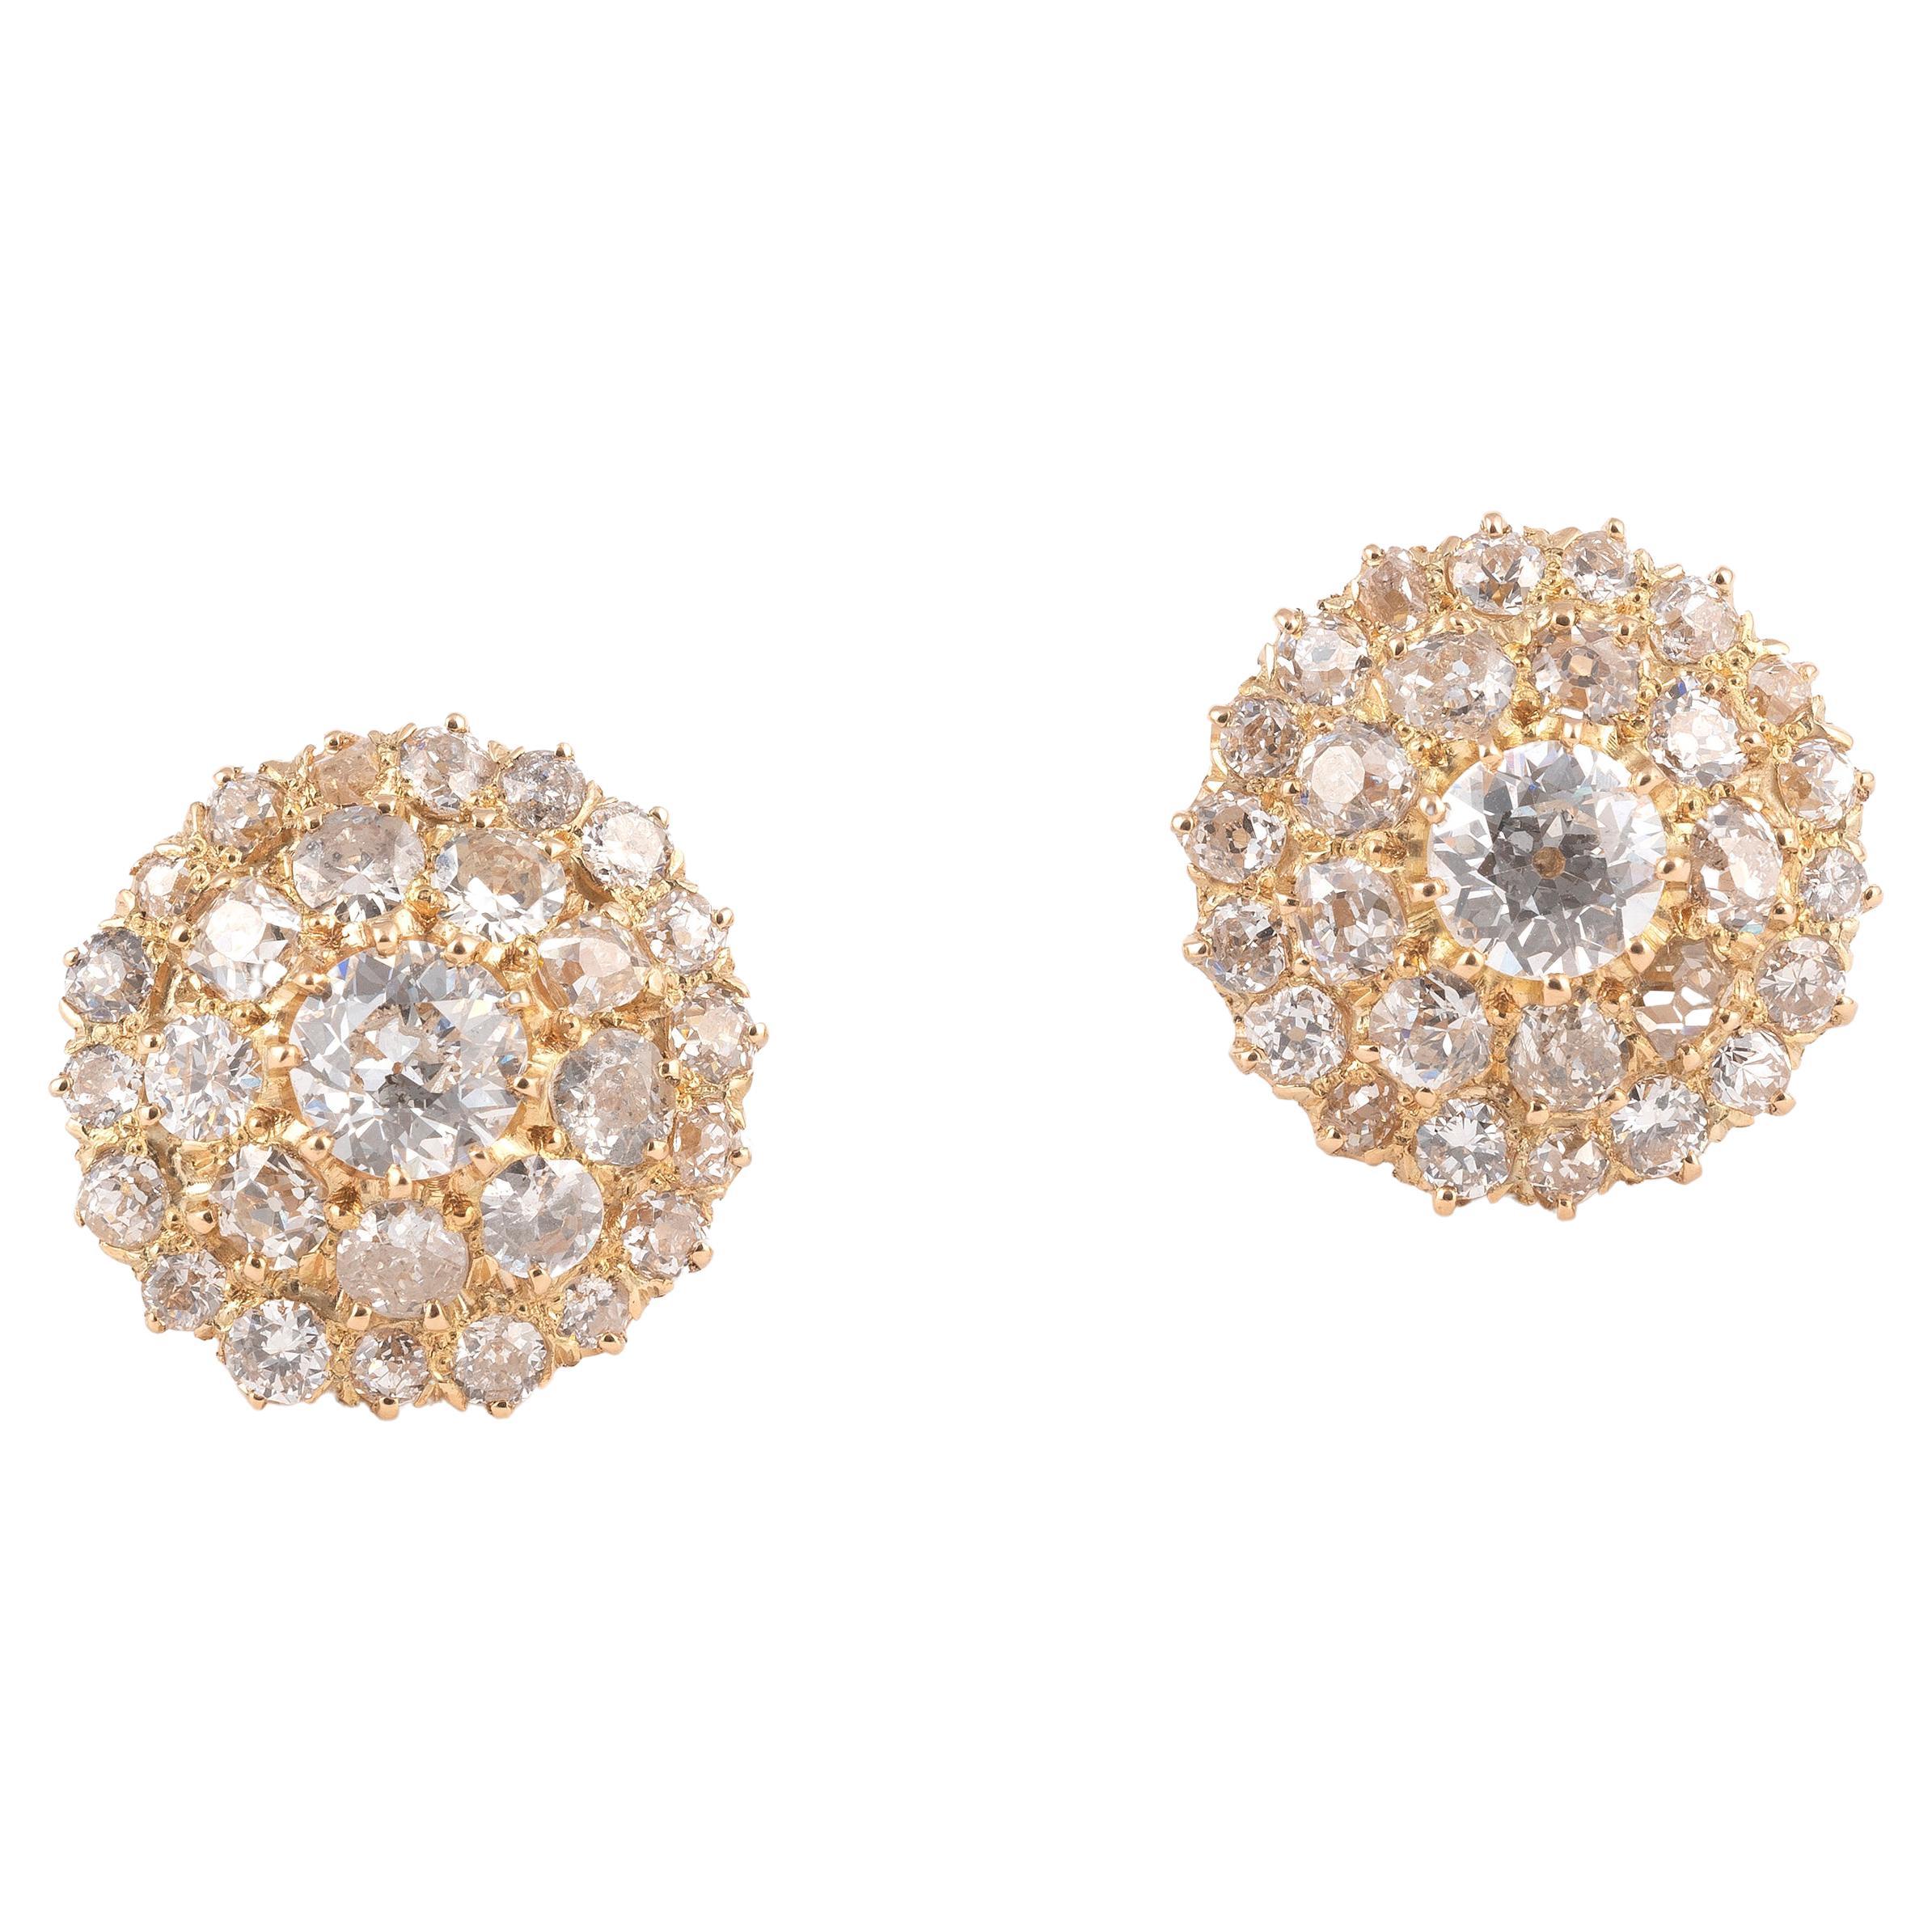 Pair of Antique Diamond Button Earrings, circa 1900 For Sale